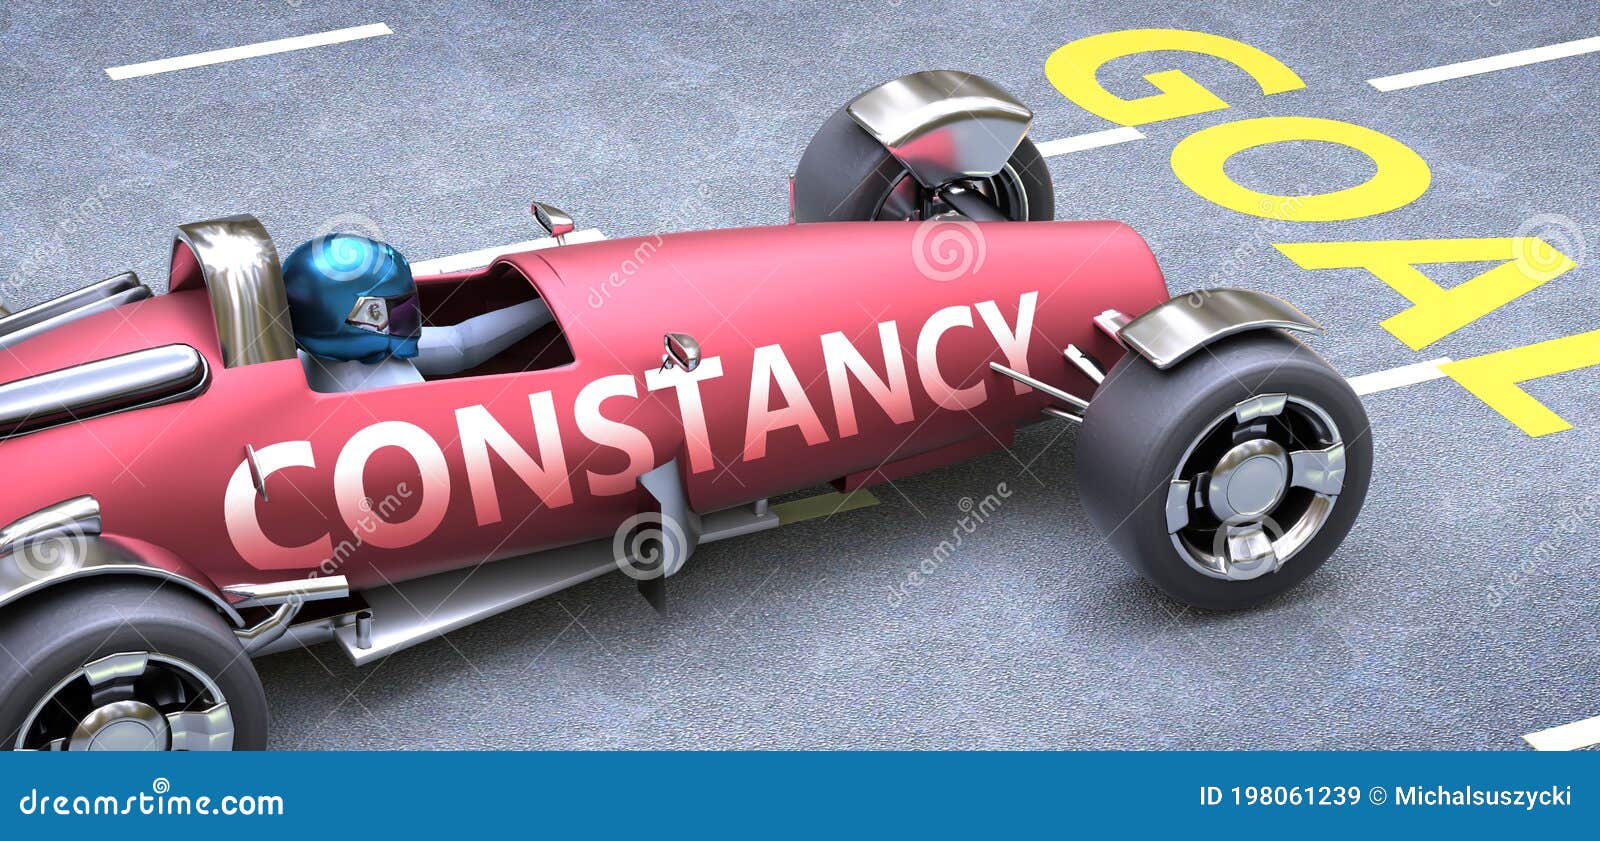 constancy helps reaching goals, pictured as a race car with a phrase constancy on a track as a metaphor of constancy playing vital